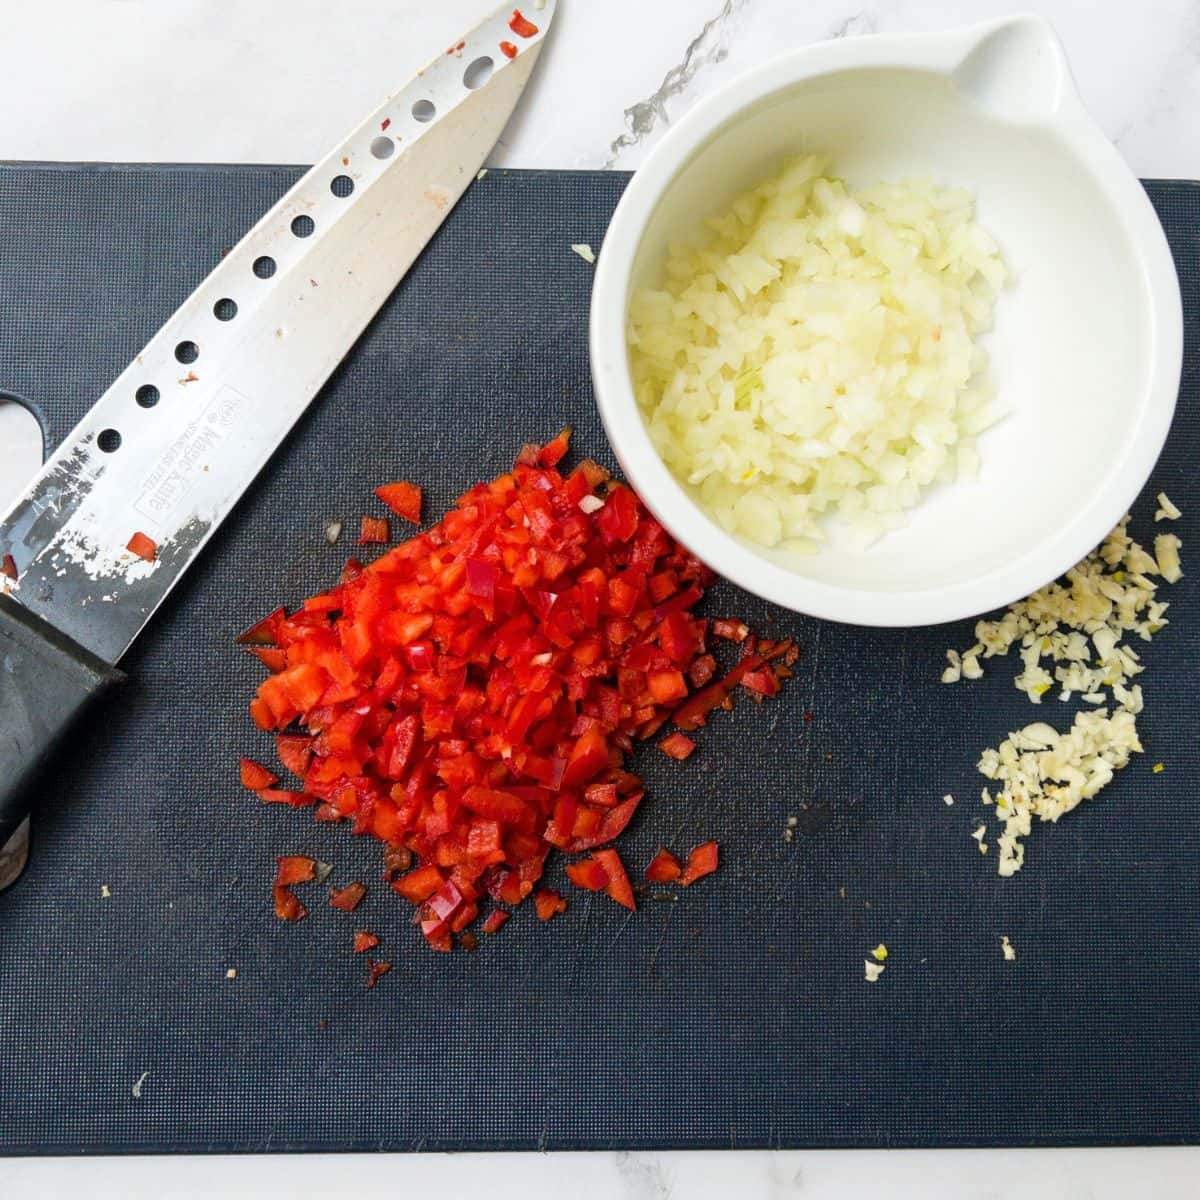 Chopped chilli, onion and garlic on a blue chopping board. A knife is also on the chopping board.